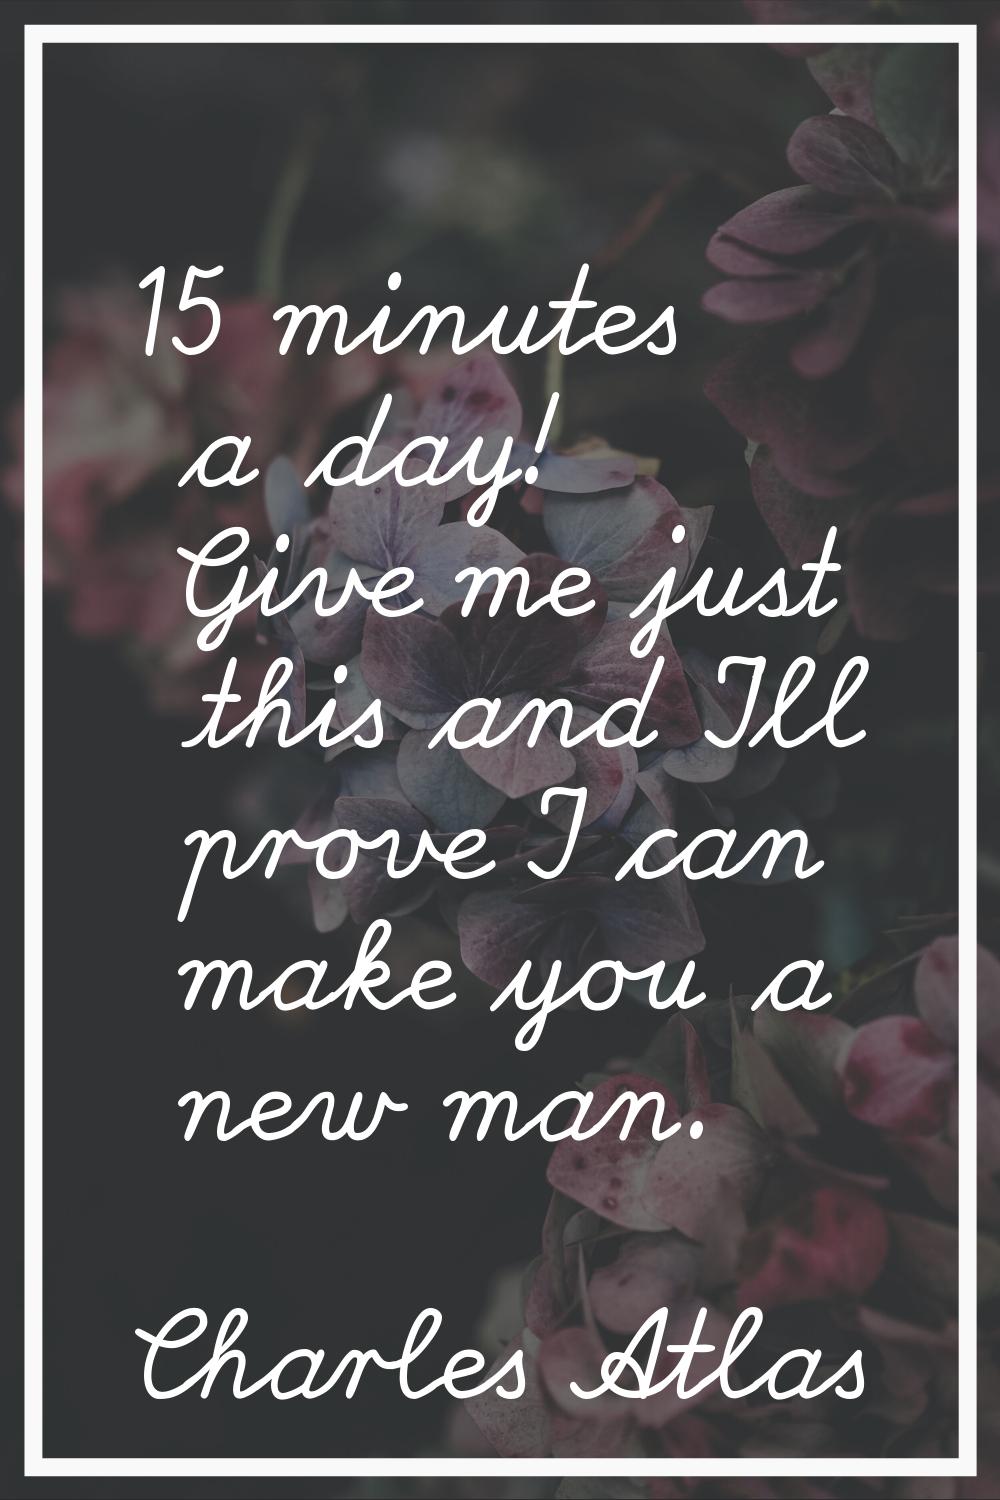 15 minutes a day! Give me just this and I'll prove I can make you a new man.